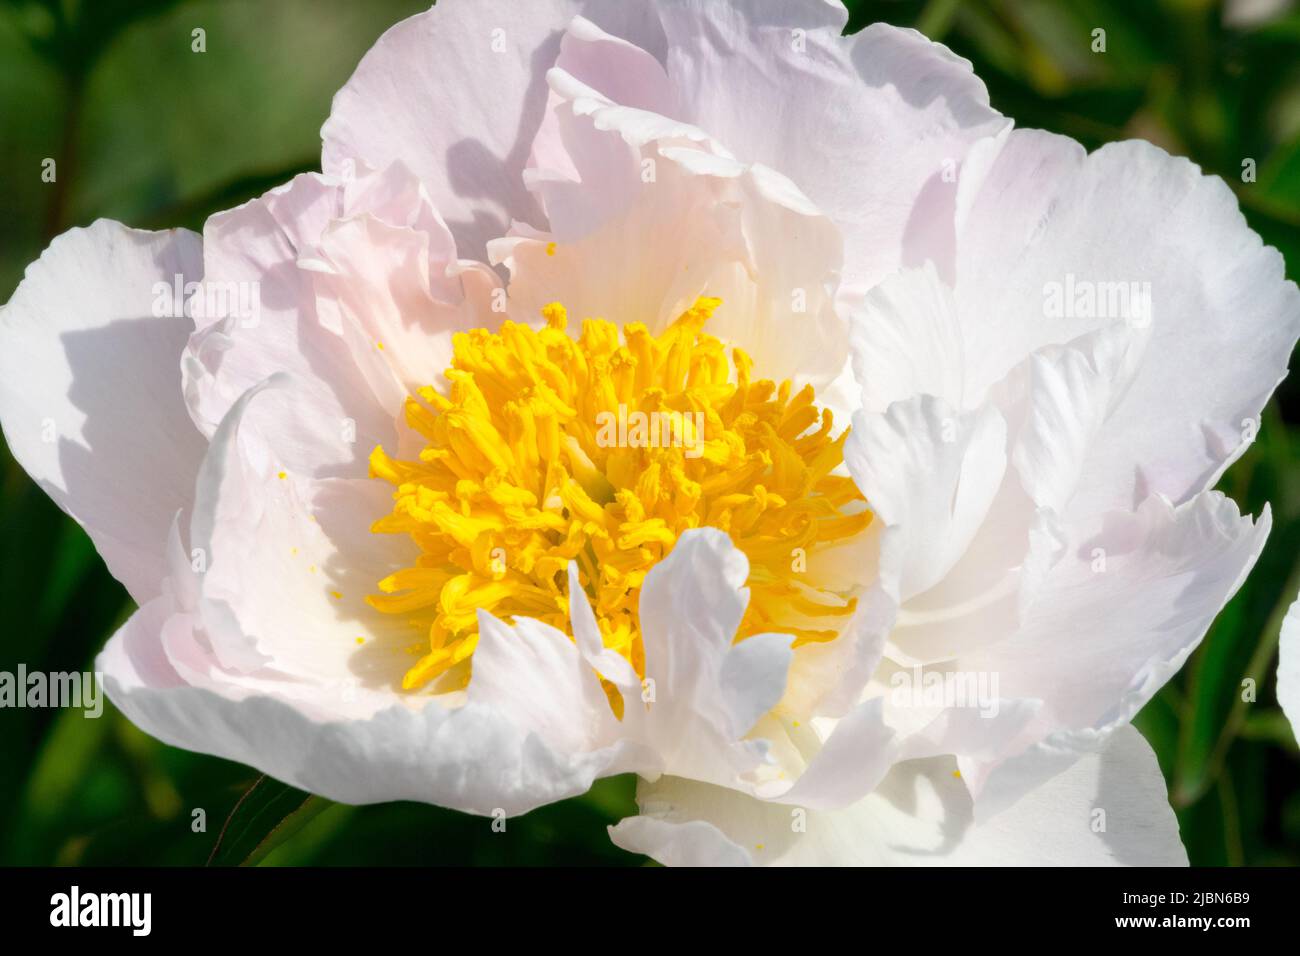 White, Paeonia 'Krinkled White', Decorative, Bloom, Beauty, Peony, Petals, Blossoms, Flower Stock Photo